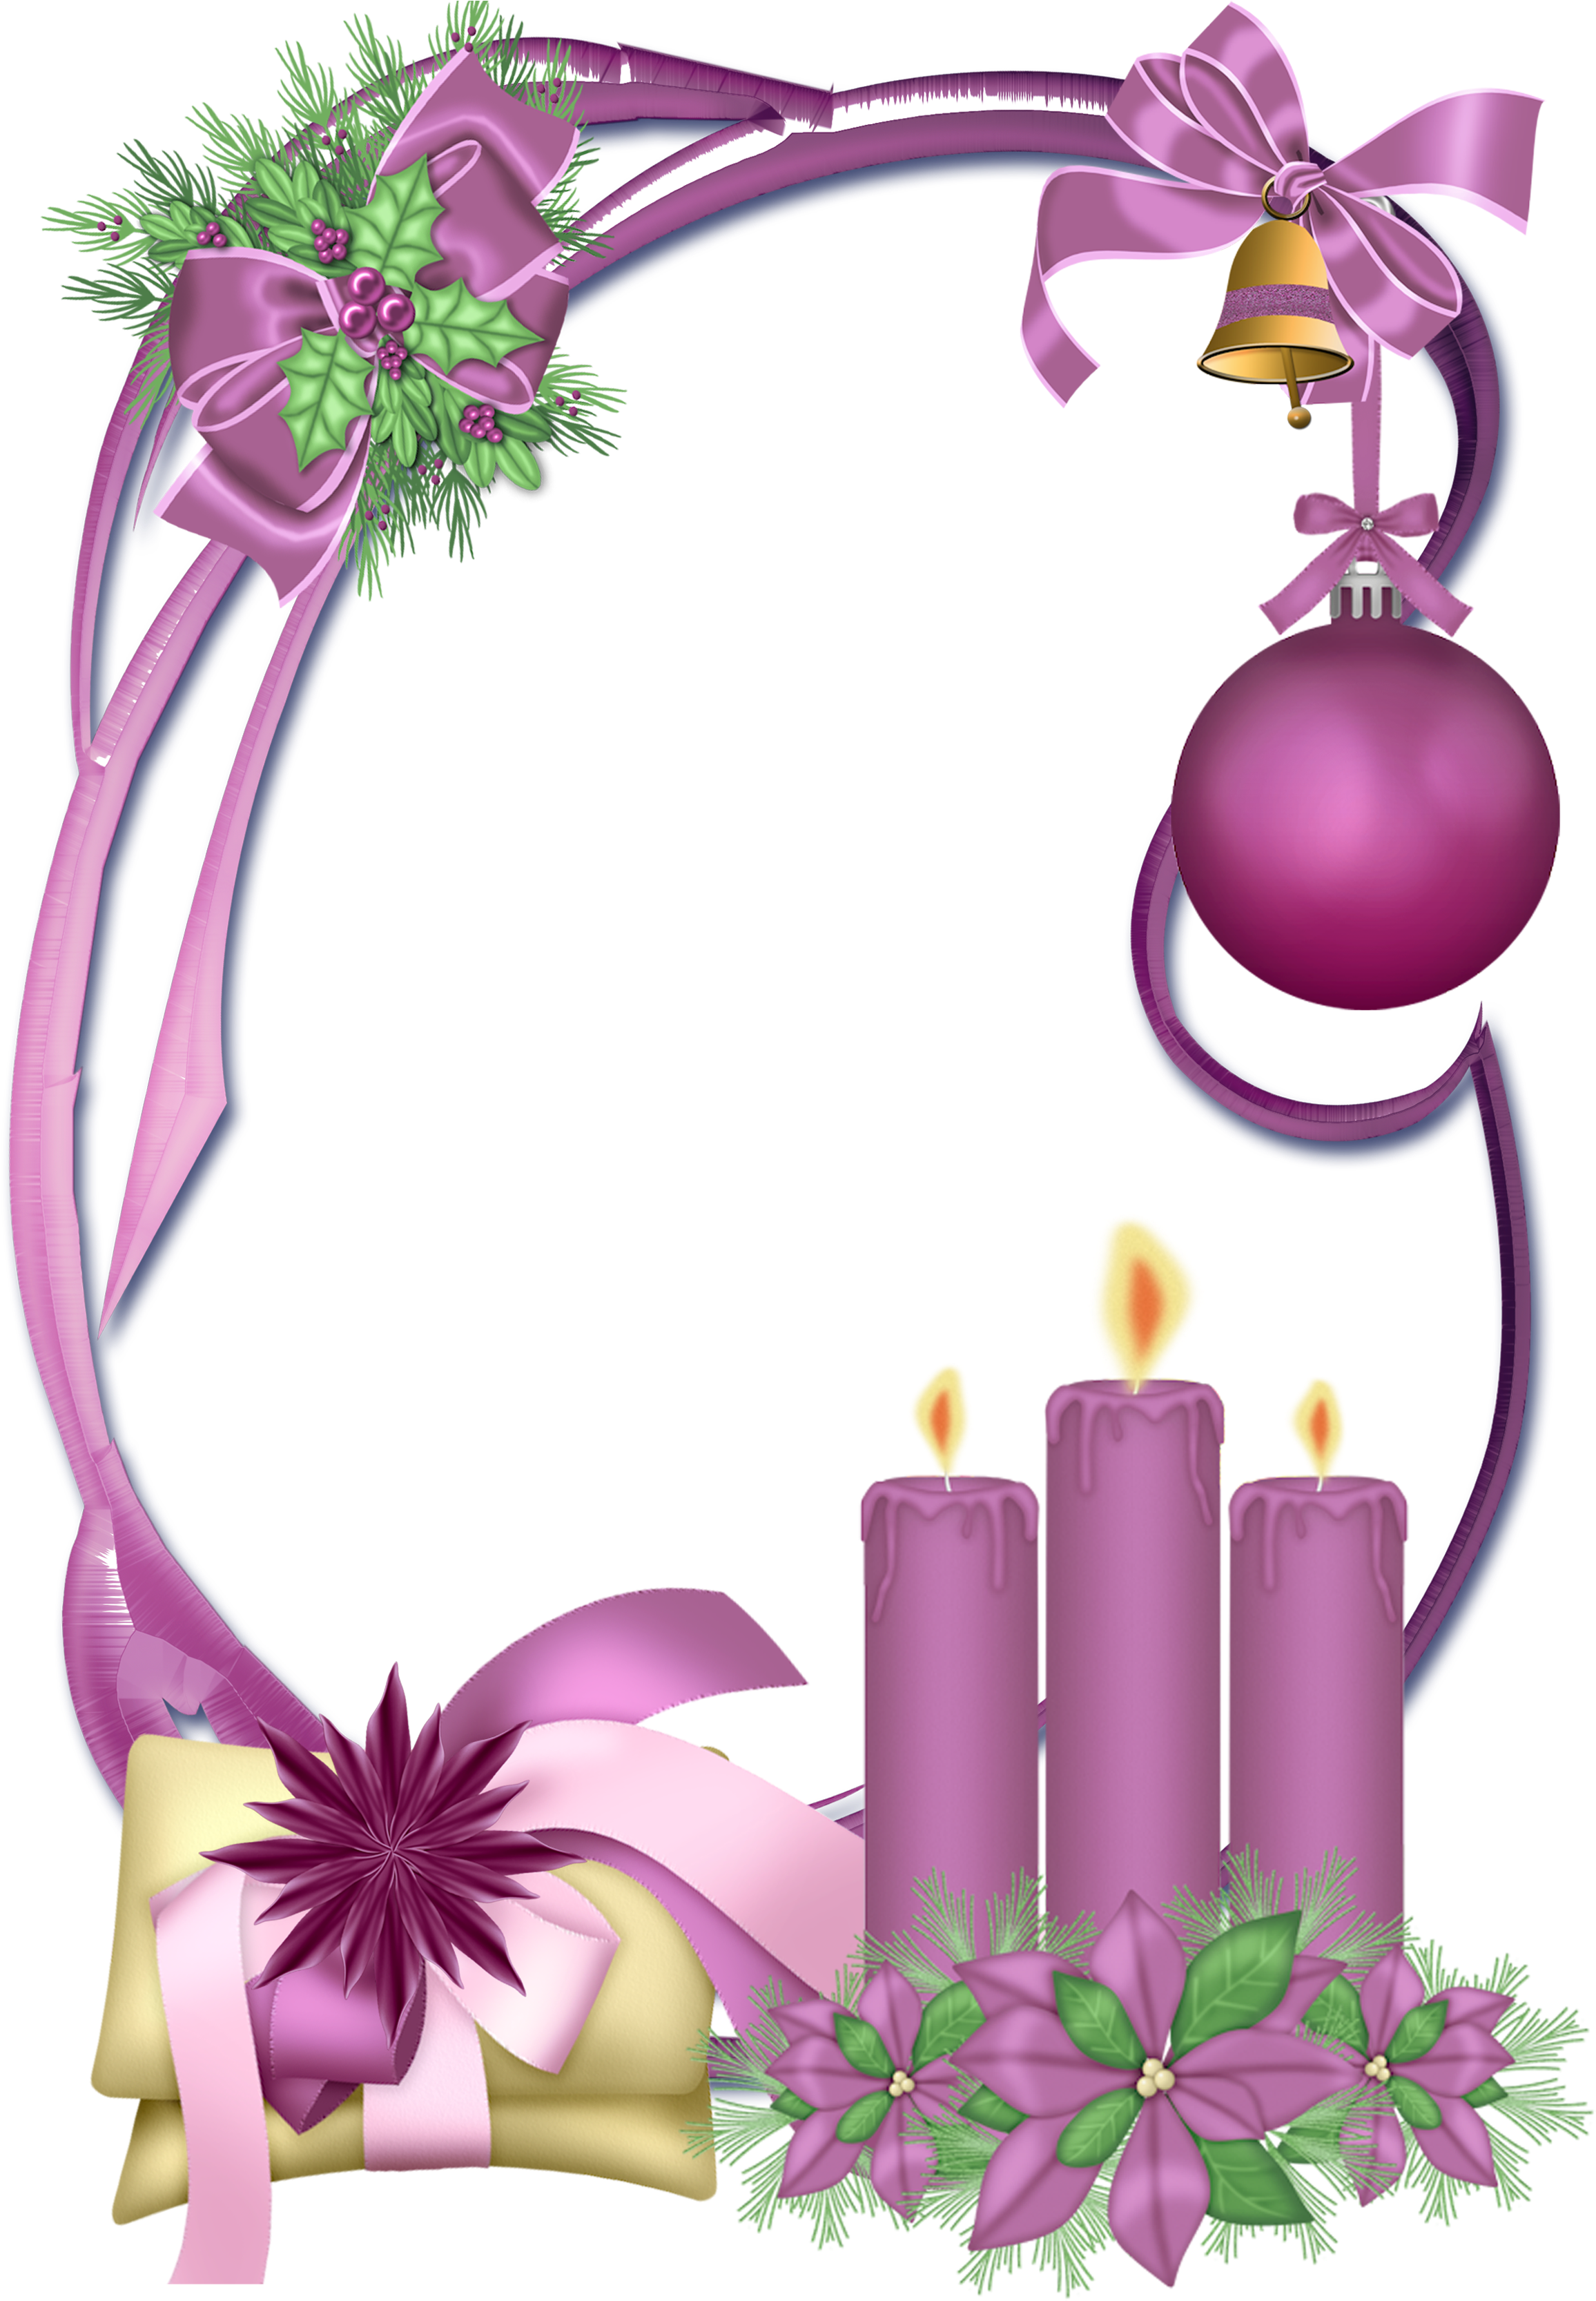 Purple Christmas Decorations With Purple Ribbon And Candles